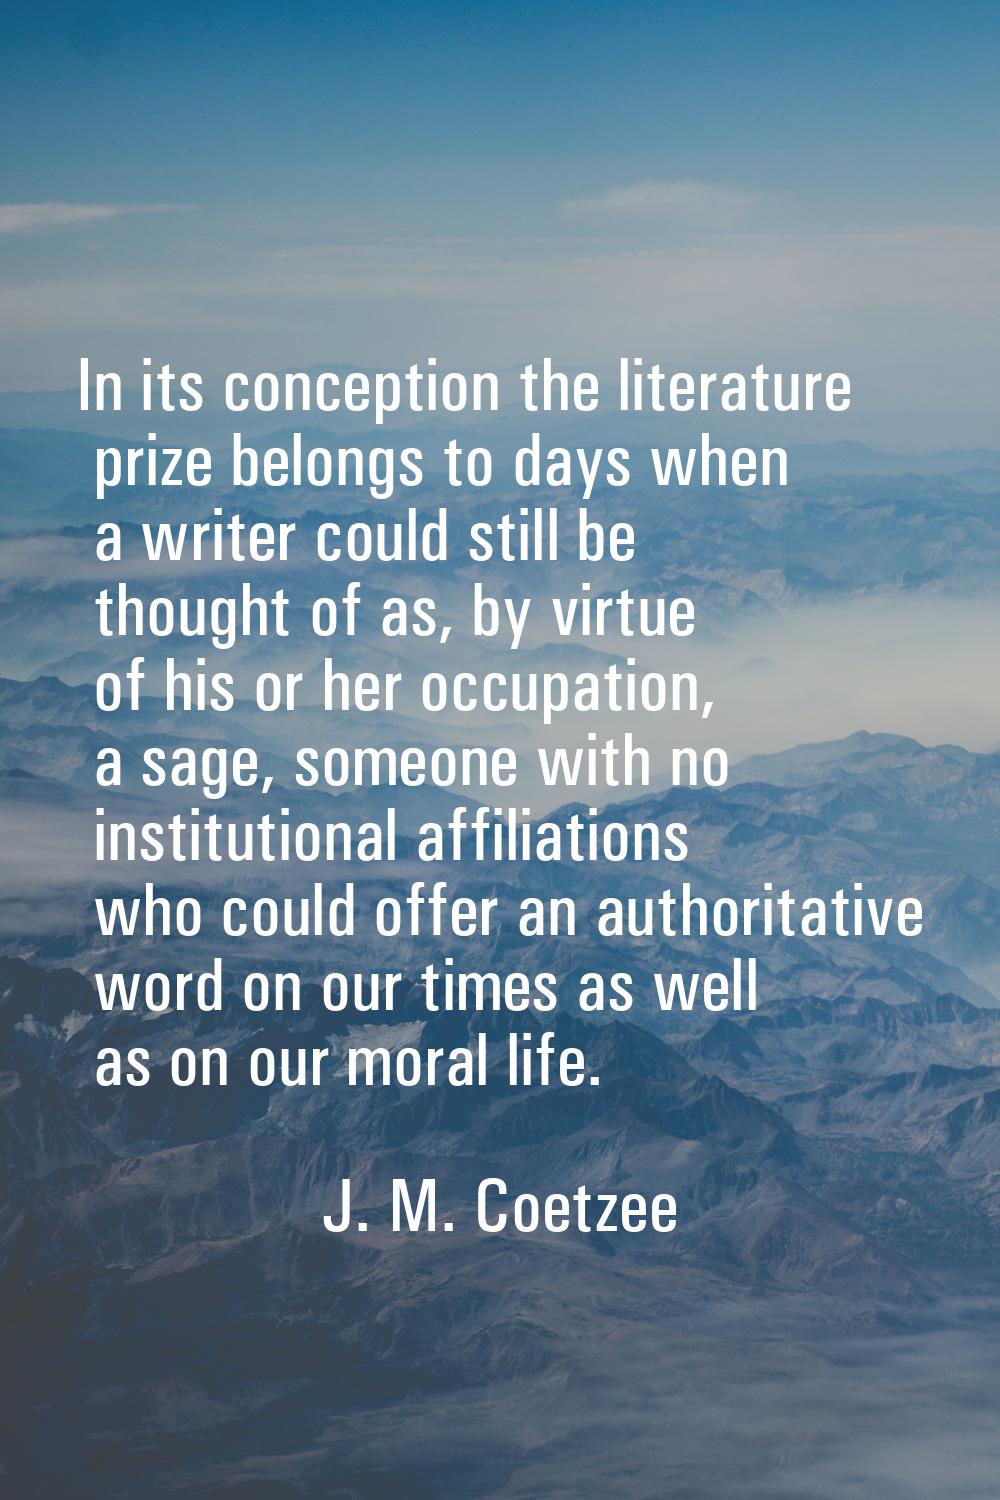 In its conception the literature prize belongs to days when a writer could still be thought of as, 